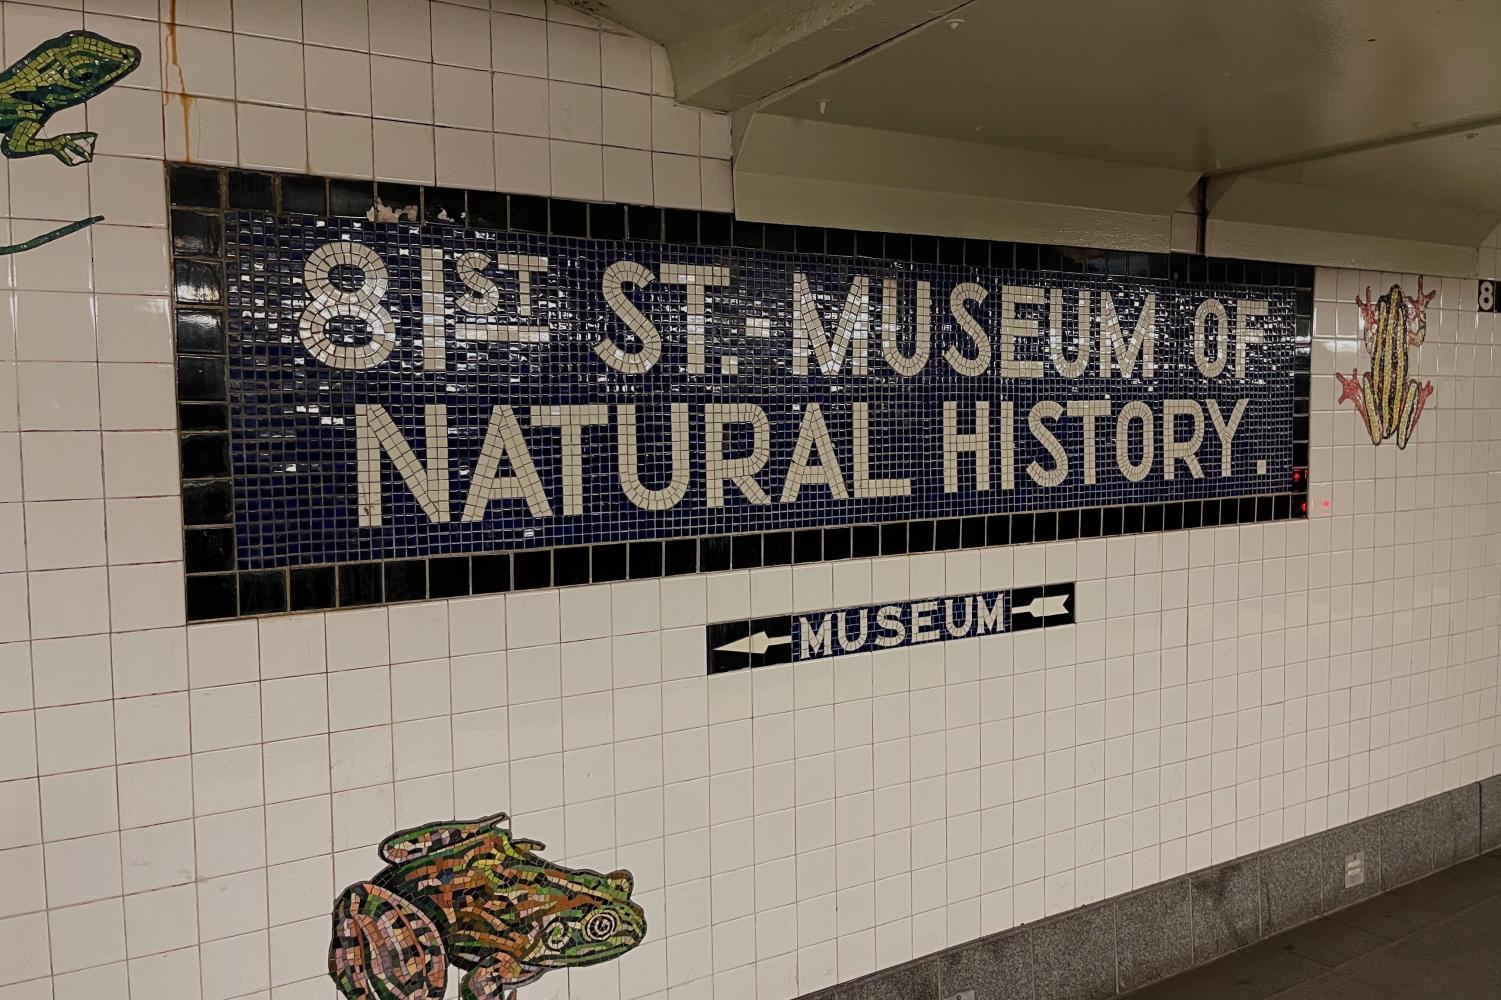 81st st museum of natural history stop on the b train